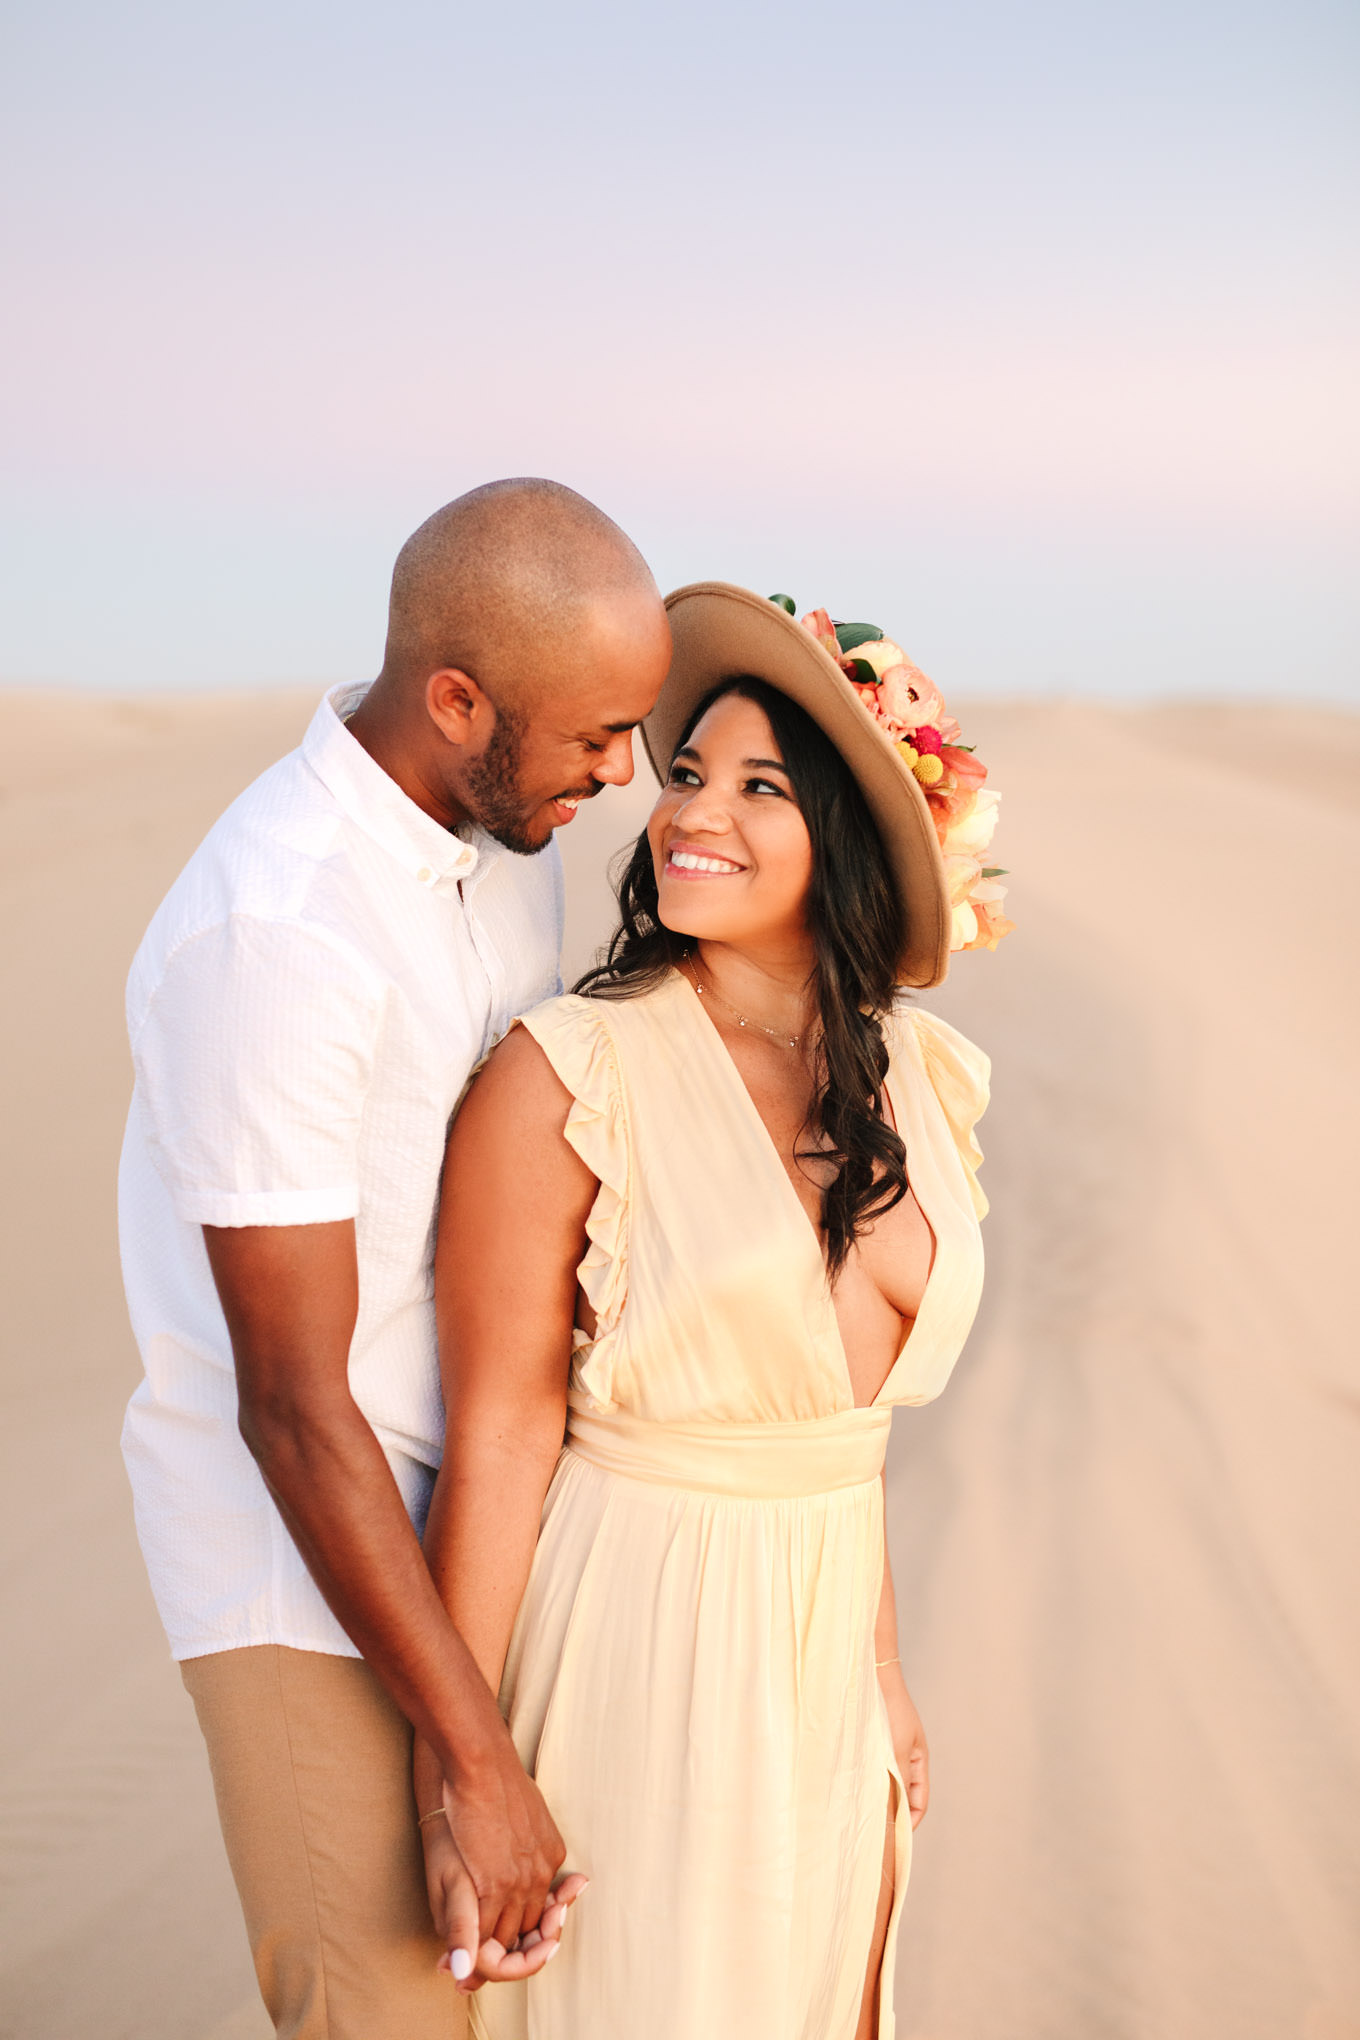 Engagement session at sand dunes | Engagement, elopement, and wedding photography roundup of Mary Costa’s favorite images from 2020 | Colorful and elevated photography for fun-loving couples in Southern California | #2020wedding #elopement #weddingphoto #weddingphotography #microwedding   Source: Mary Costa Photography | Los Angeles